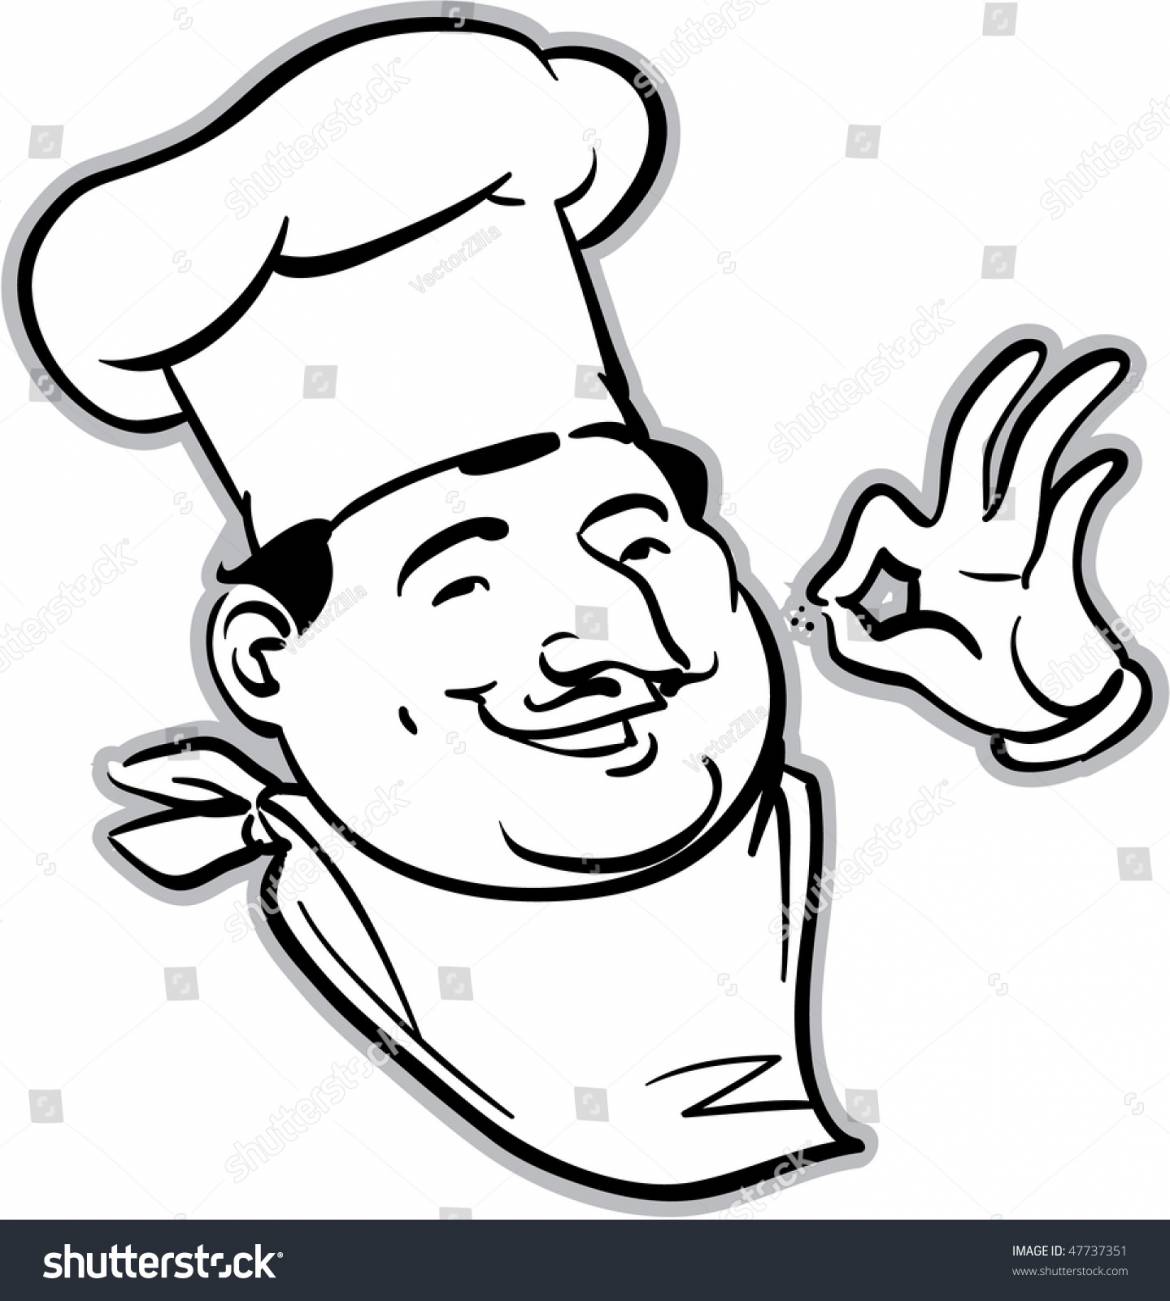 stock-vector-vector-smiling-pizza-chef-giving-the-okay-sign-illustration-477373511.jpg